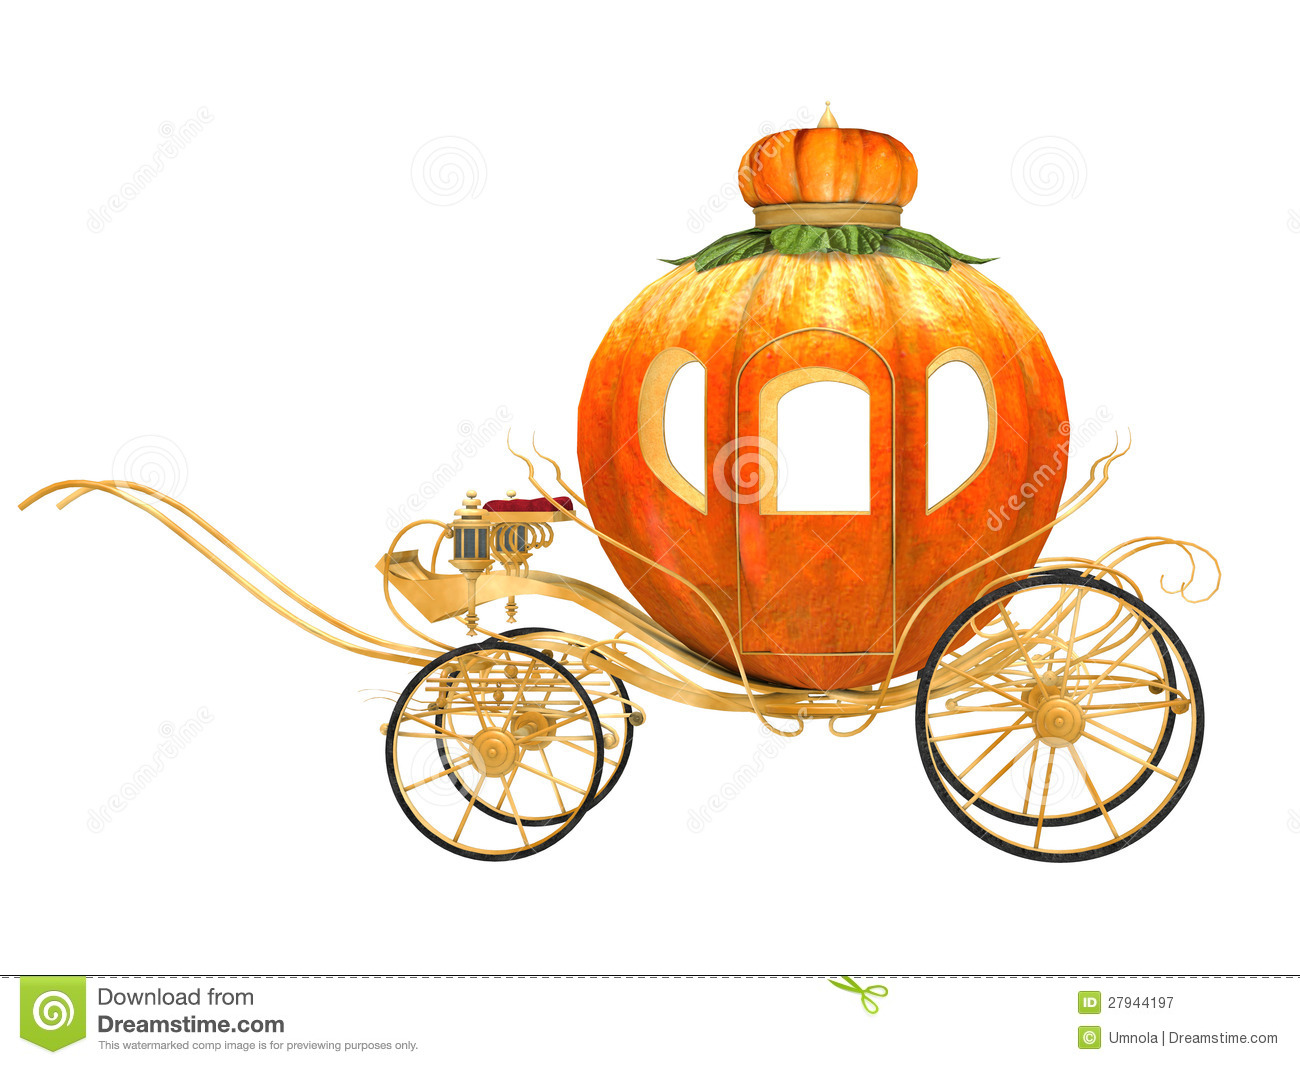 Cinderella Fairy Tale Pumpkin Carriage Royalty Free Stock Photography